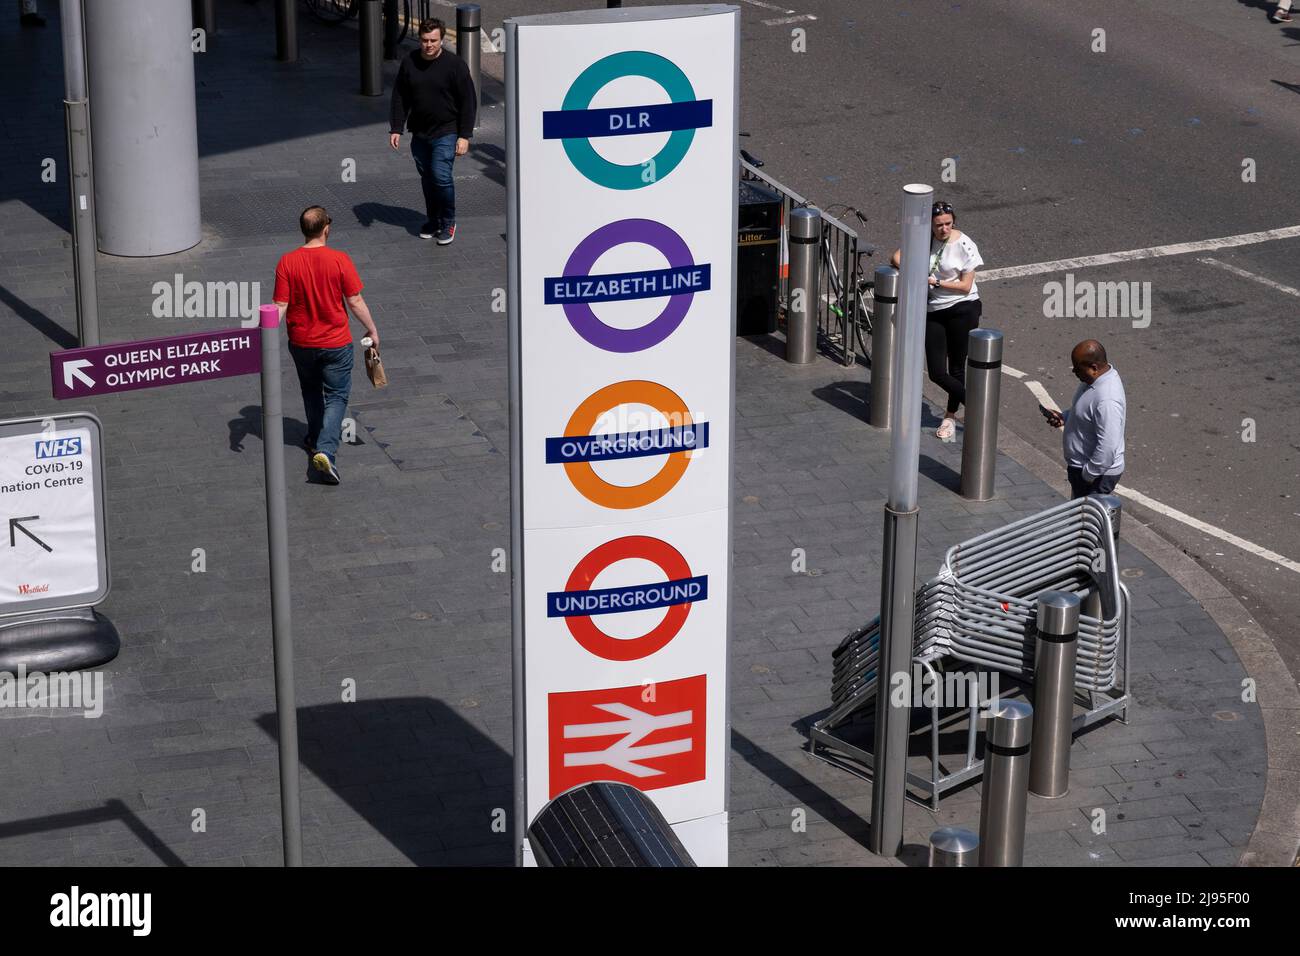 Sign outside Stratford station for the Elizabeth Line, DLR, Overground and London Underground on 18th May 2022 in London, United Kingdom. The Elizabeth line is to run services on Crossrail in Central London and to the west along the Great Western Main Line; and east along the Great Eastern Main Line. The the line will open to the public on 24th May 2022. The project has been subject to long delays, originally supposed to open in December 2018, and is vastly over budget by £4bn. Stock Photo